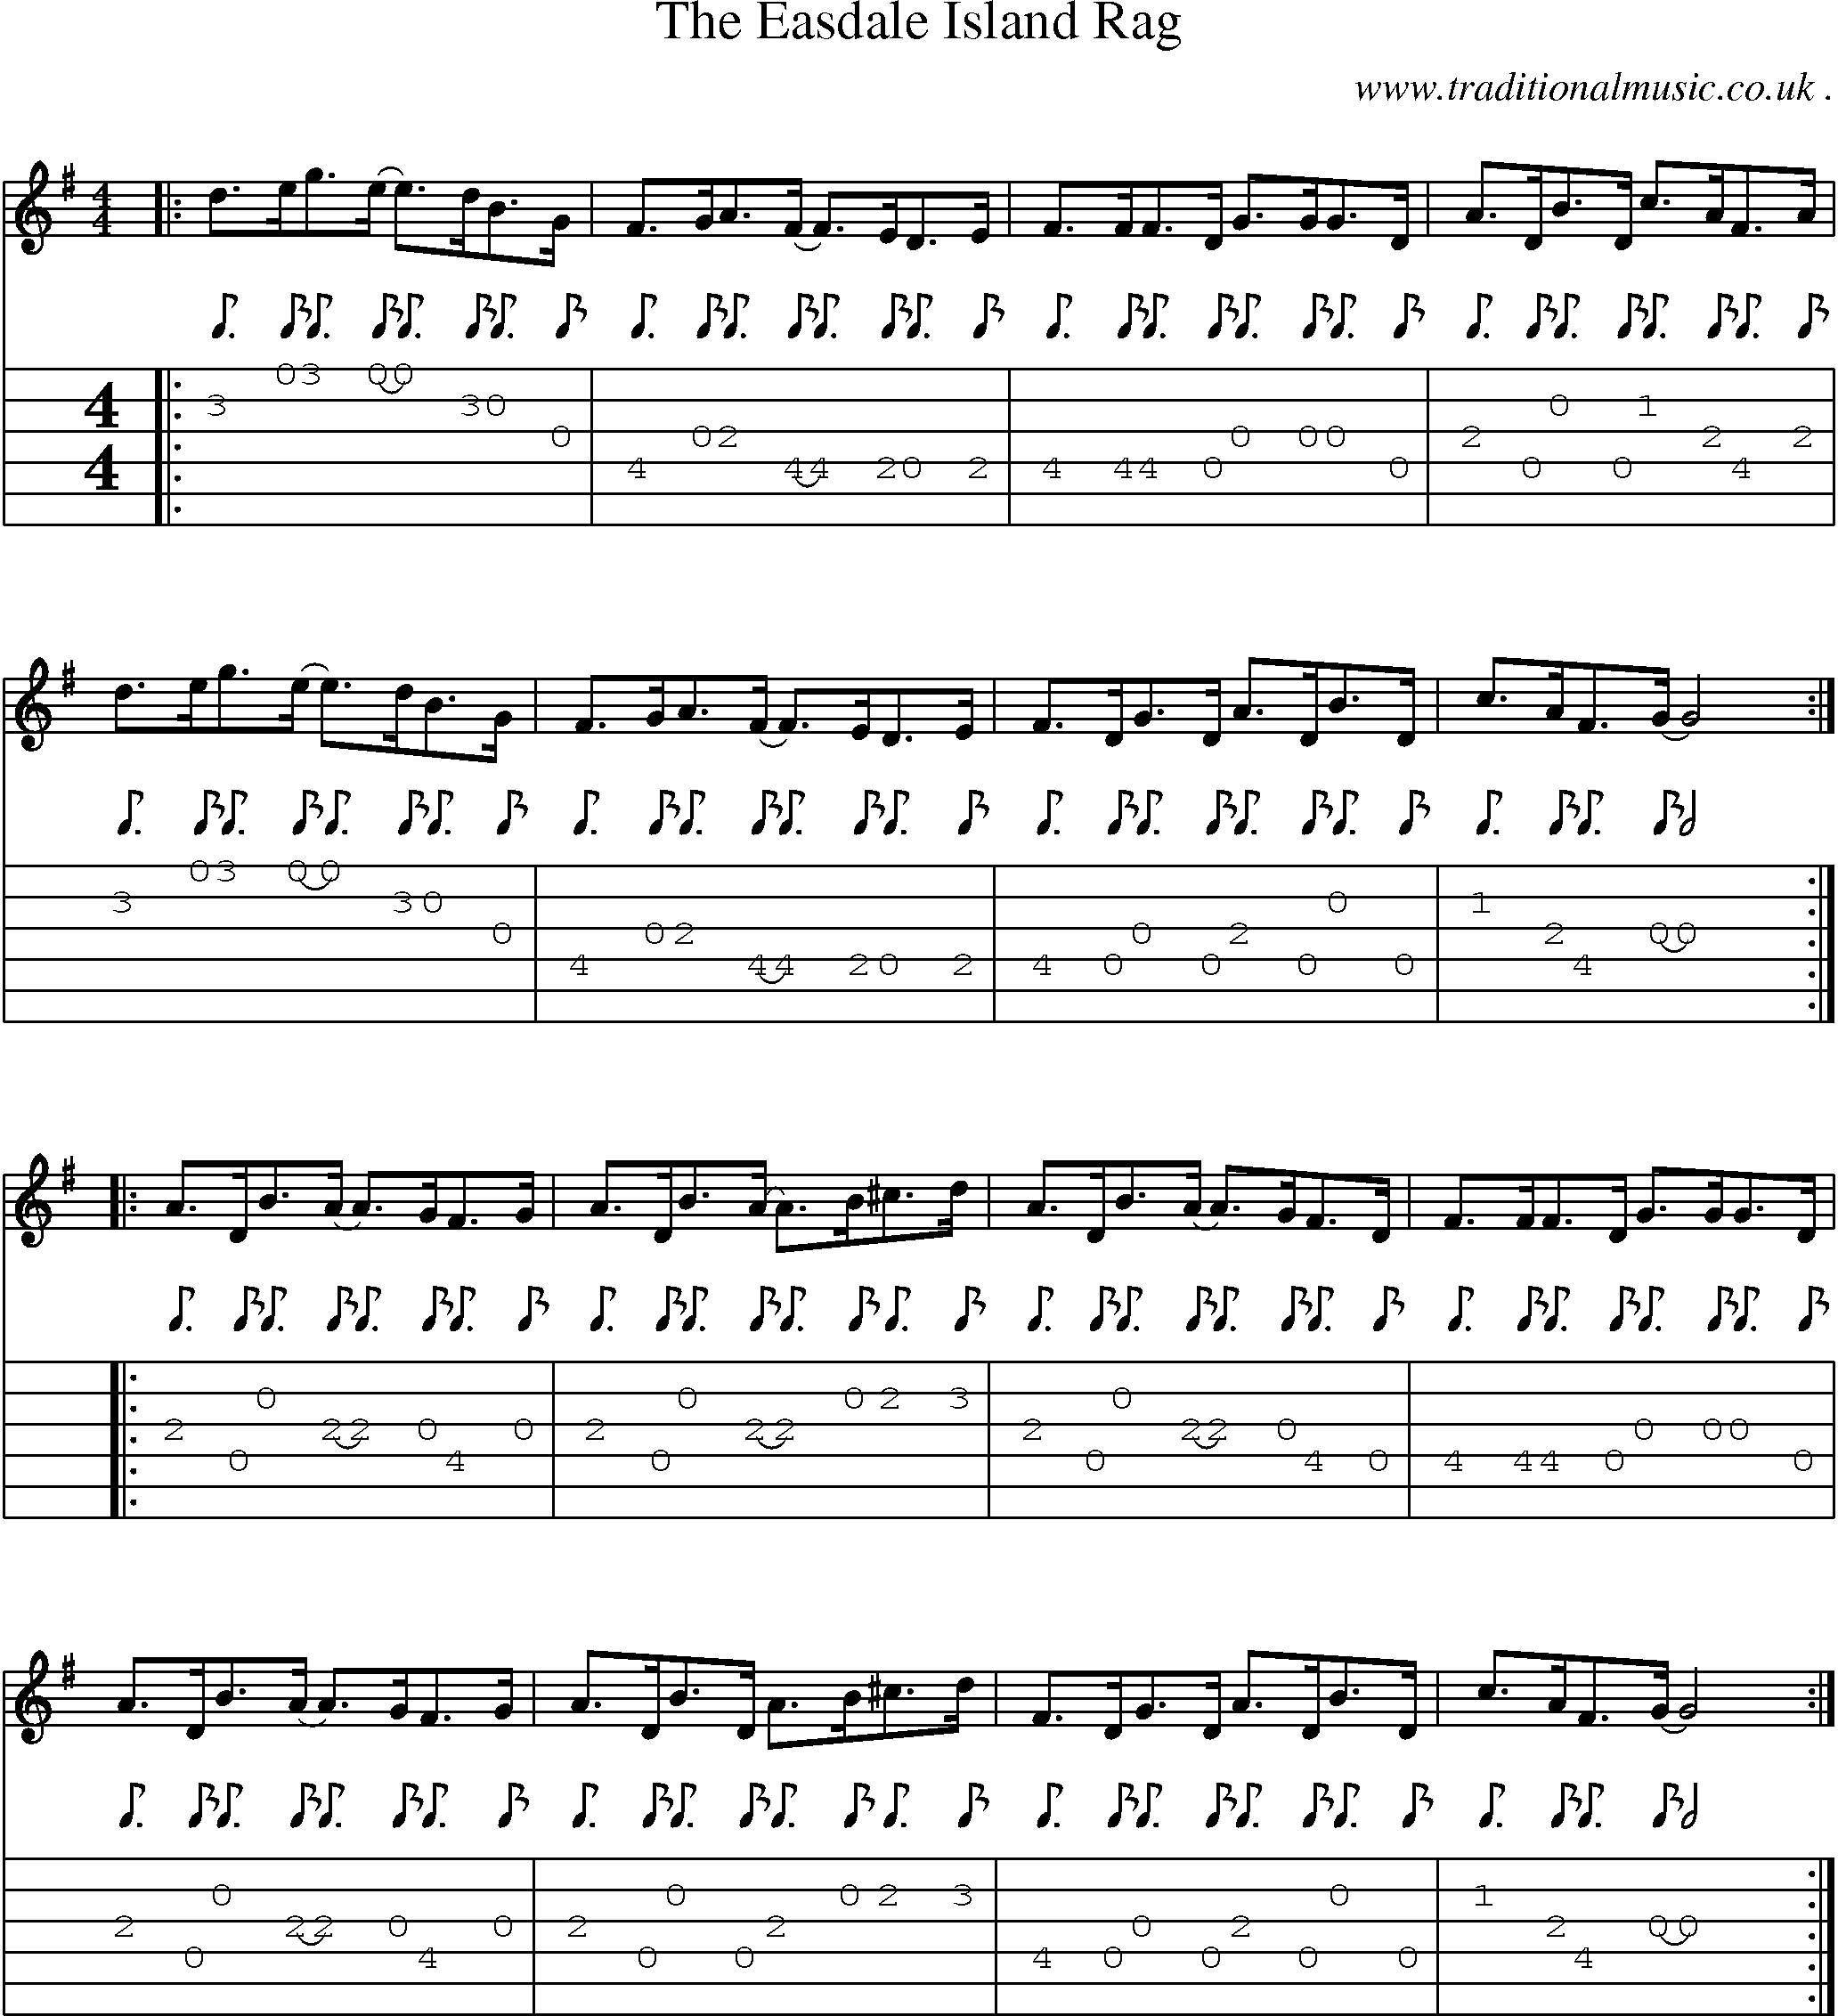 Sheet-Music and Guitar Tabs for The Easdale Island Rag